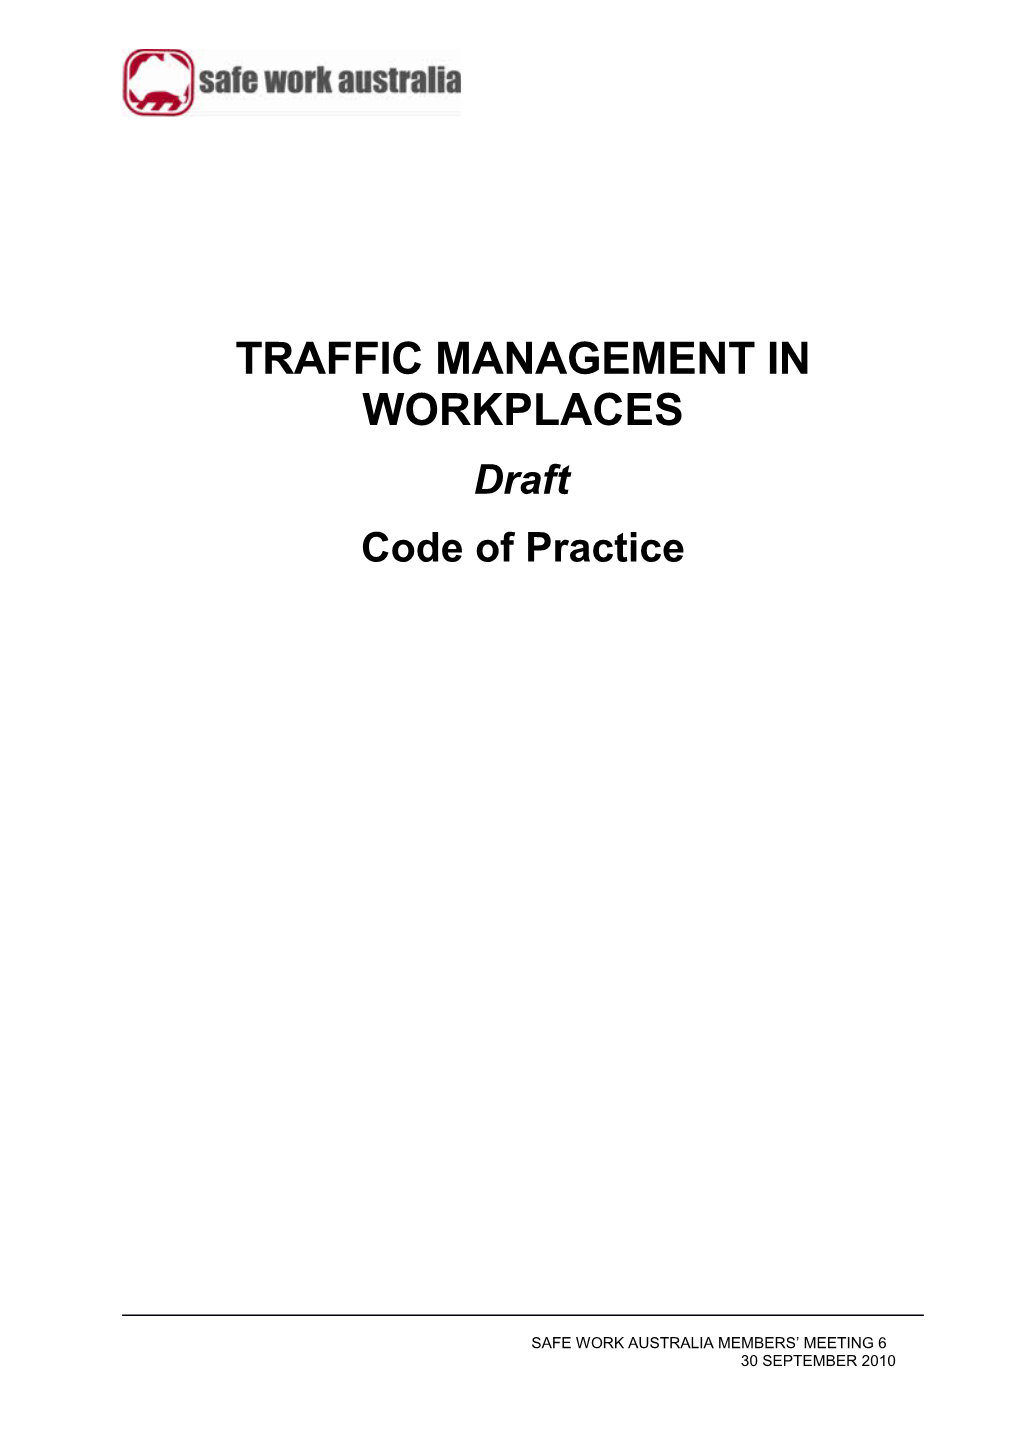 Traffic Management in Workplaces